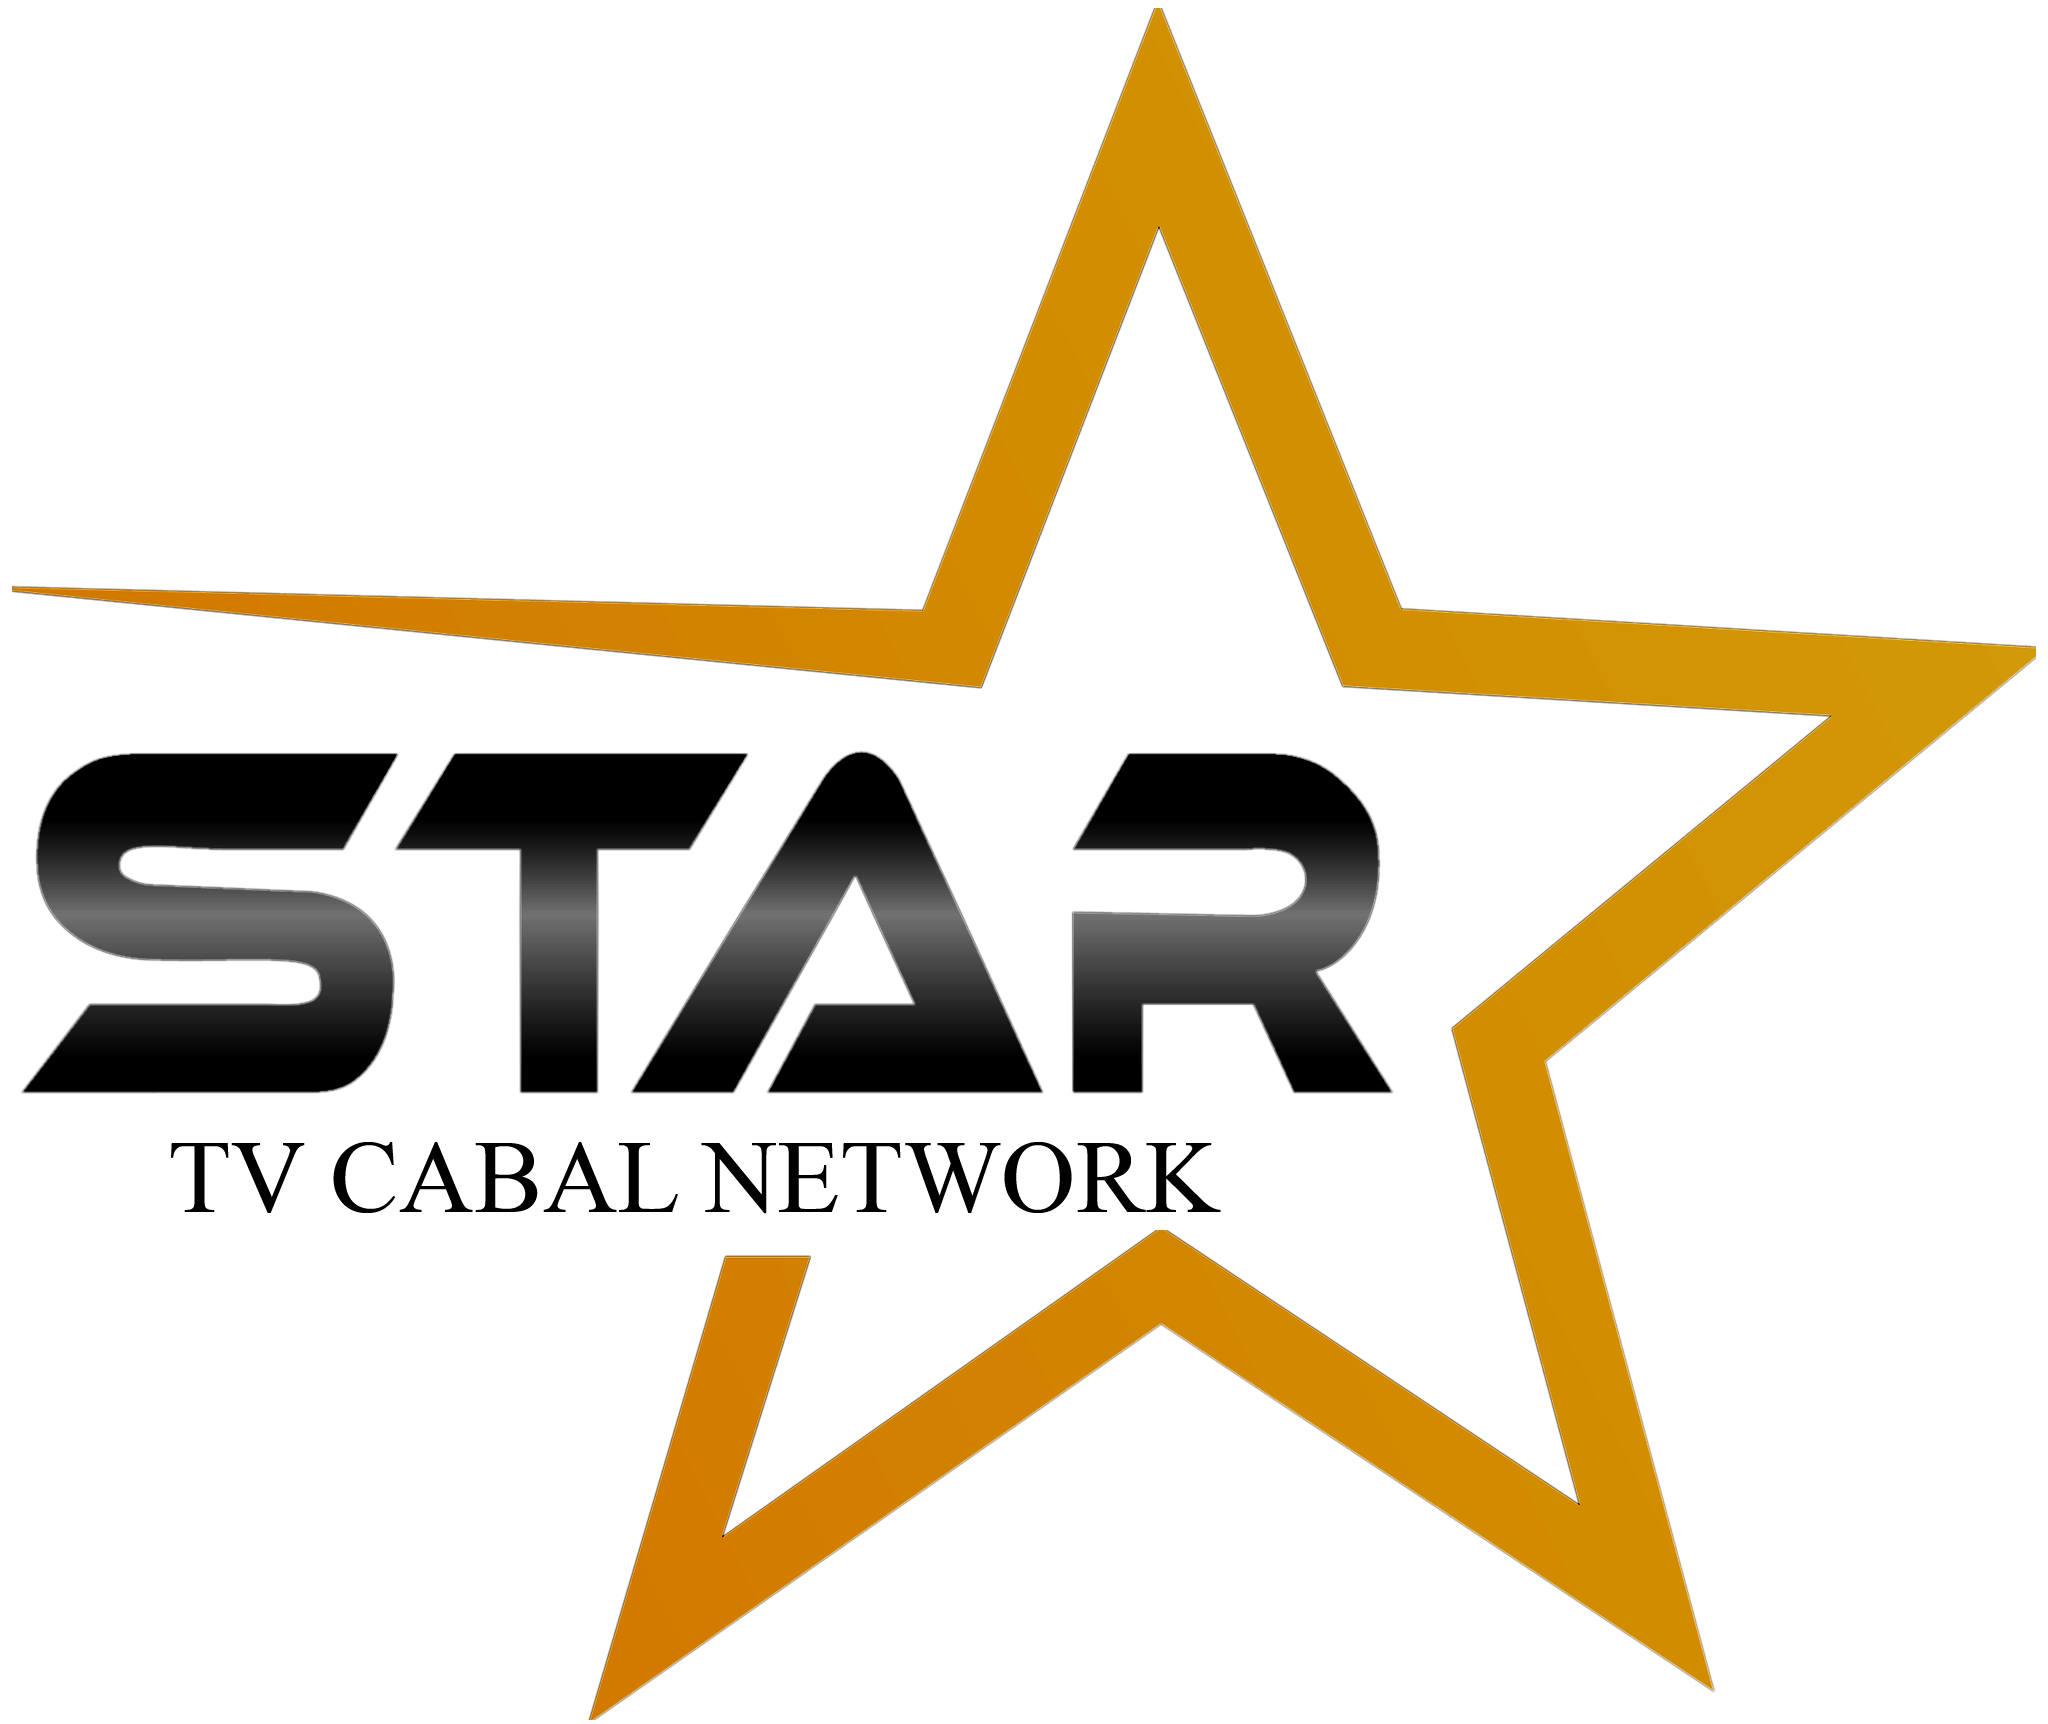 Star Tv Cable Network (STCN)-logo